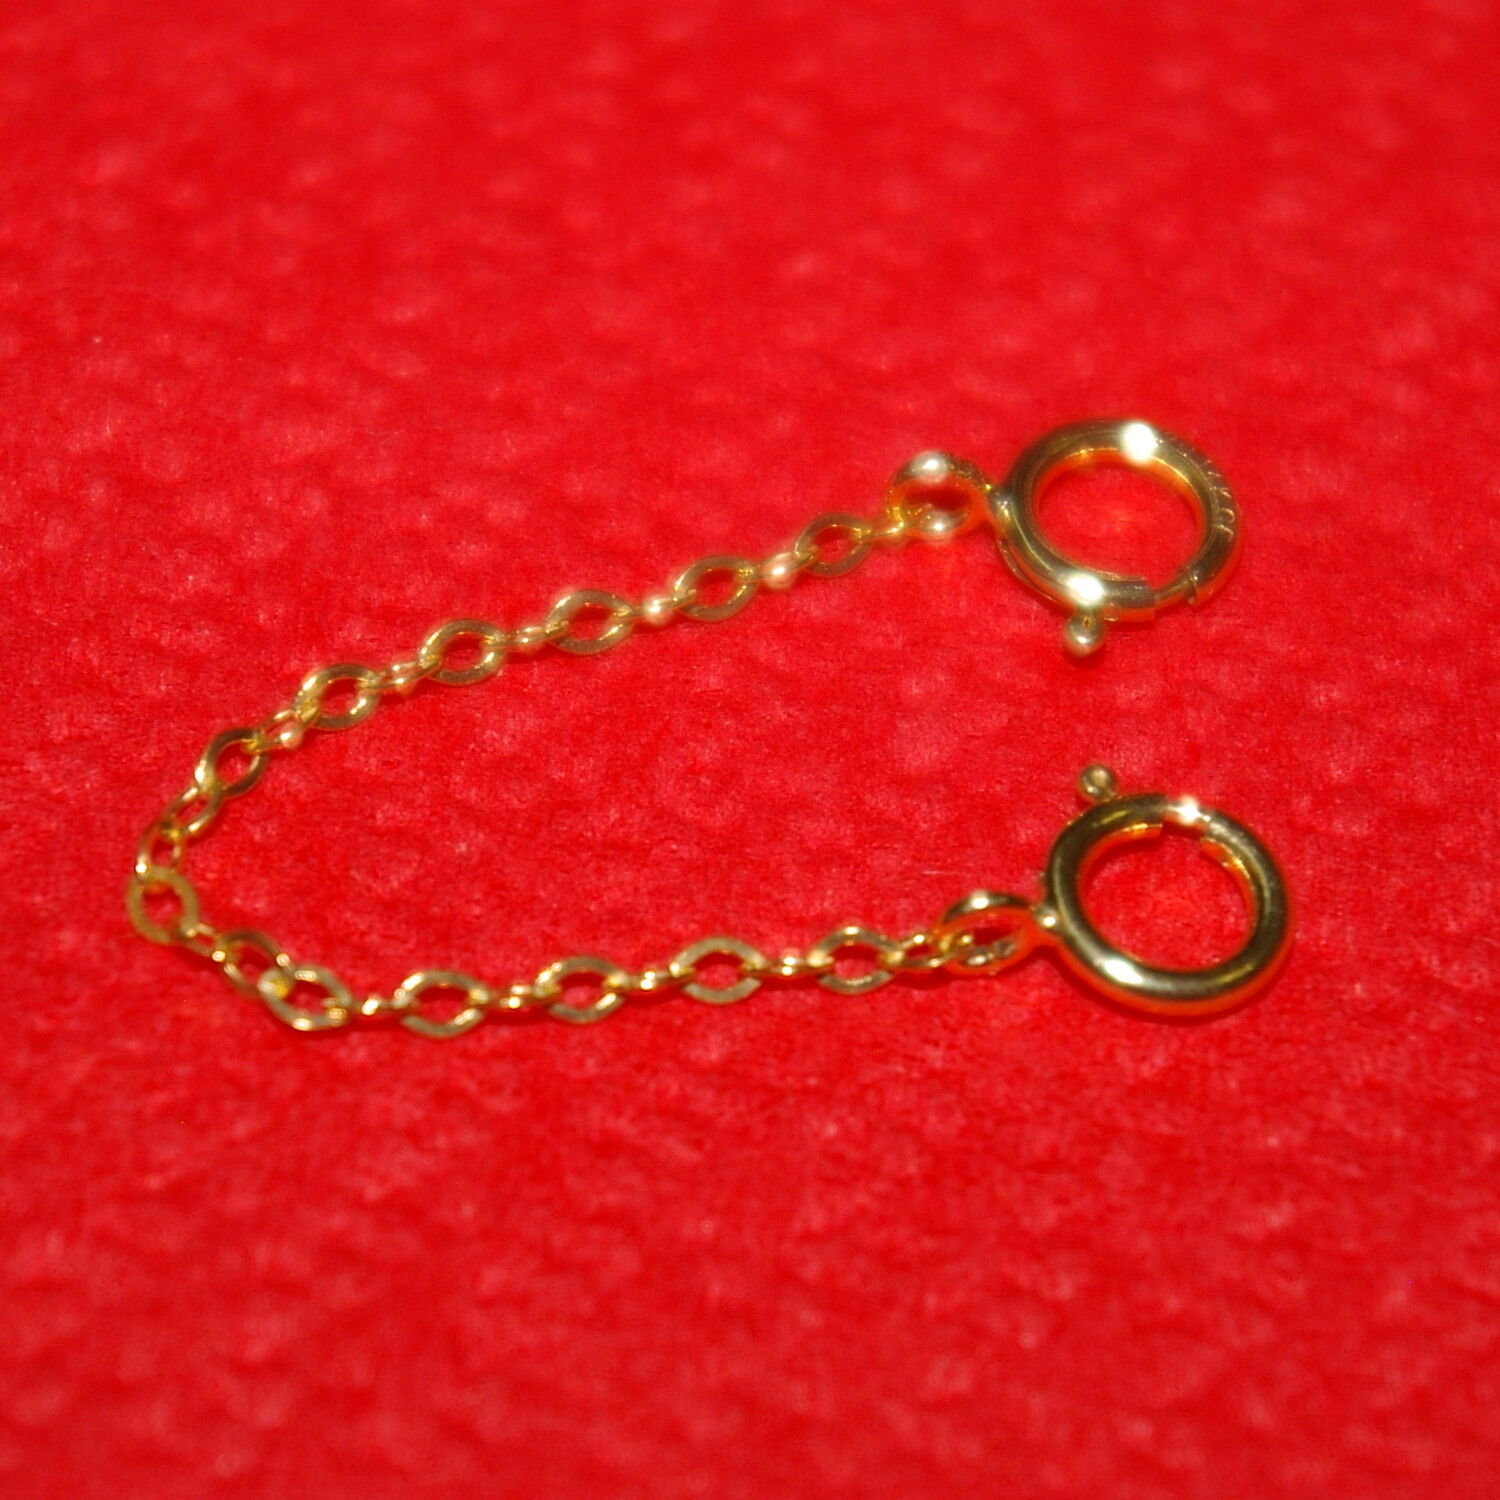 5 pcs 14kt GOLD FILLED 1.5x2mm Flat Cable Chain EXTENDERS with Two Spring Clasps BalliSilver - фотография #4